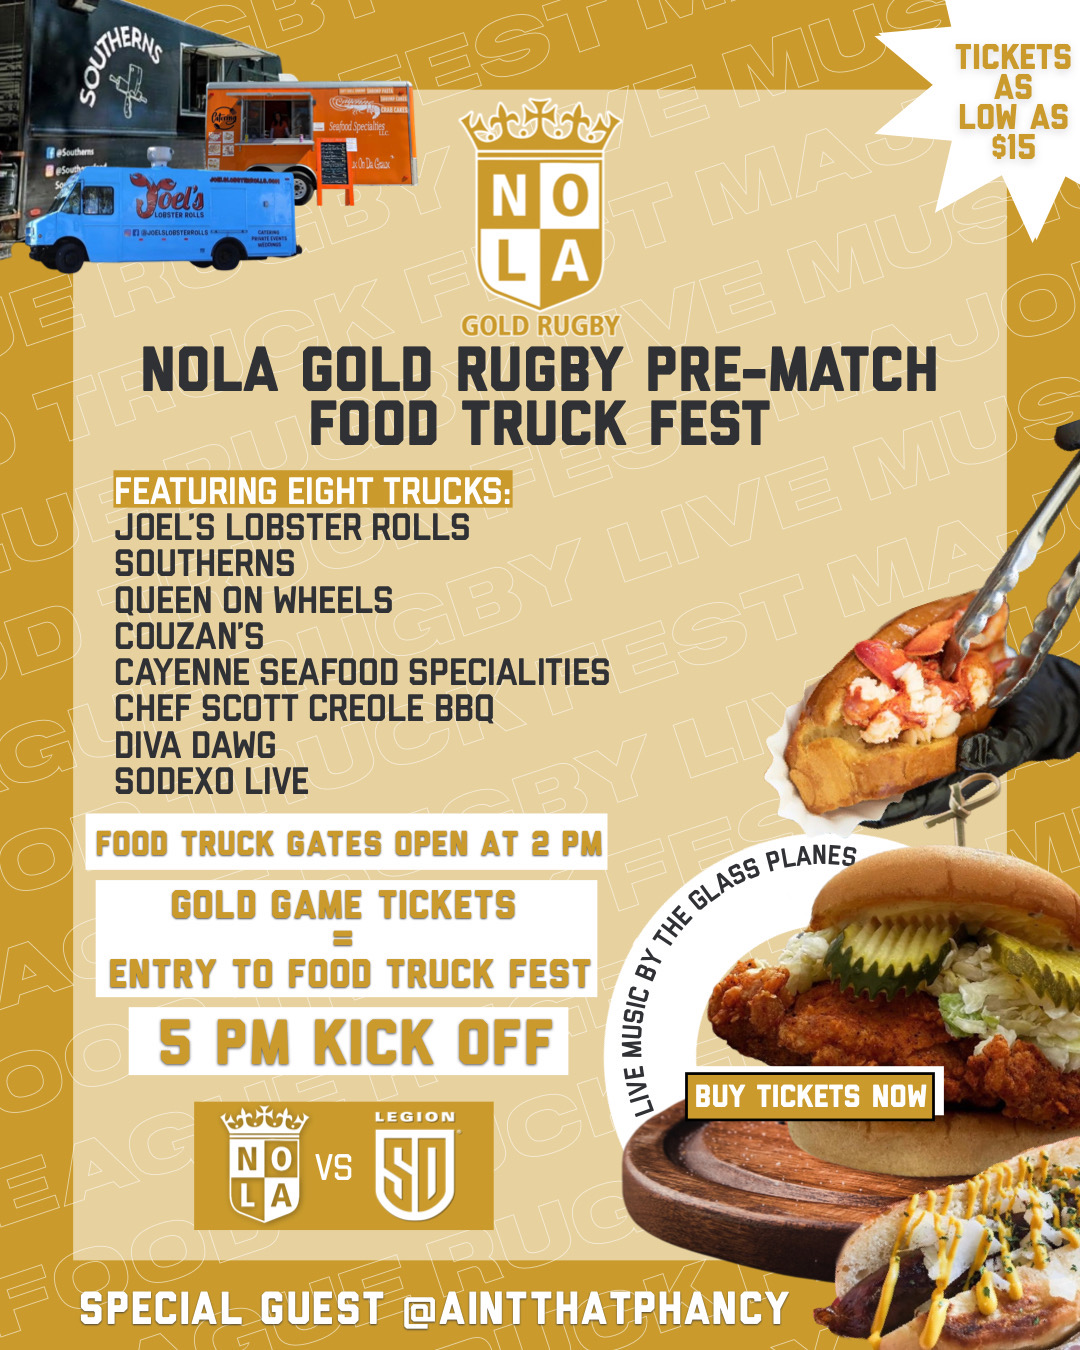 Pre-Match Food Truck Fest on Saturday, May 13th